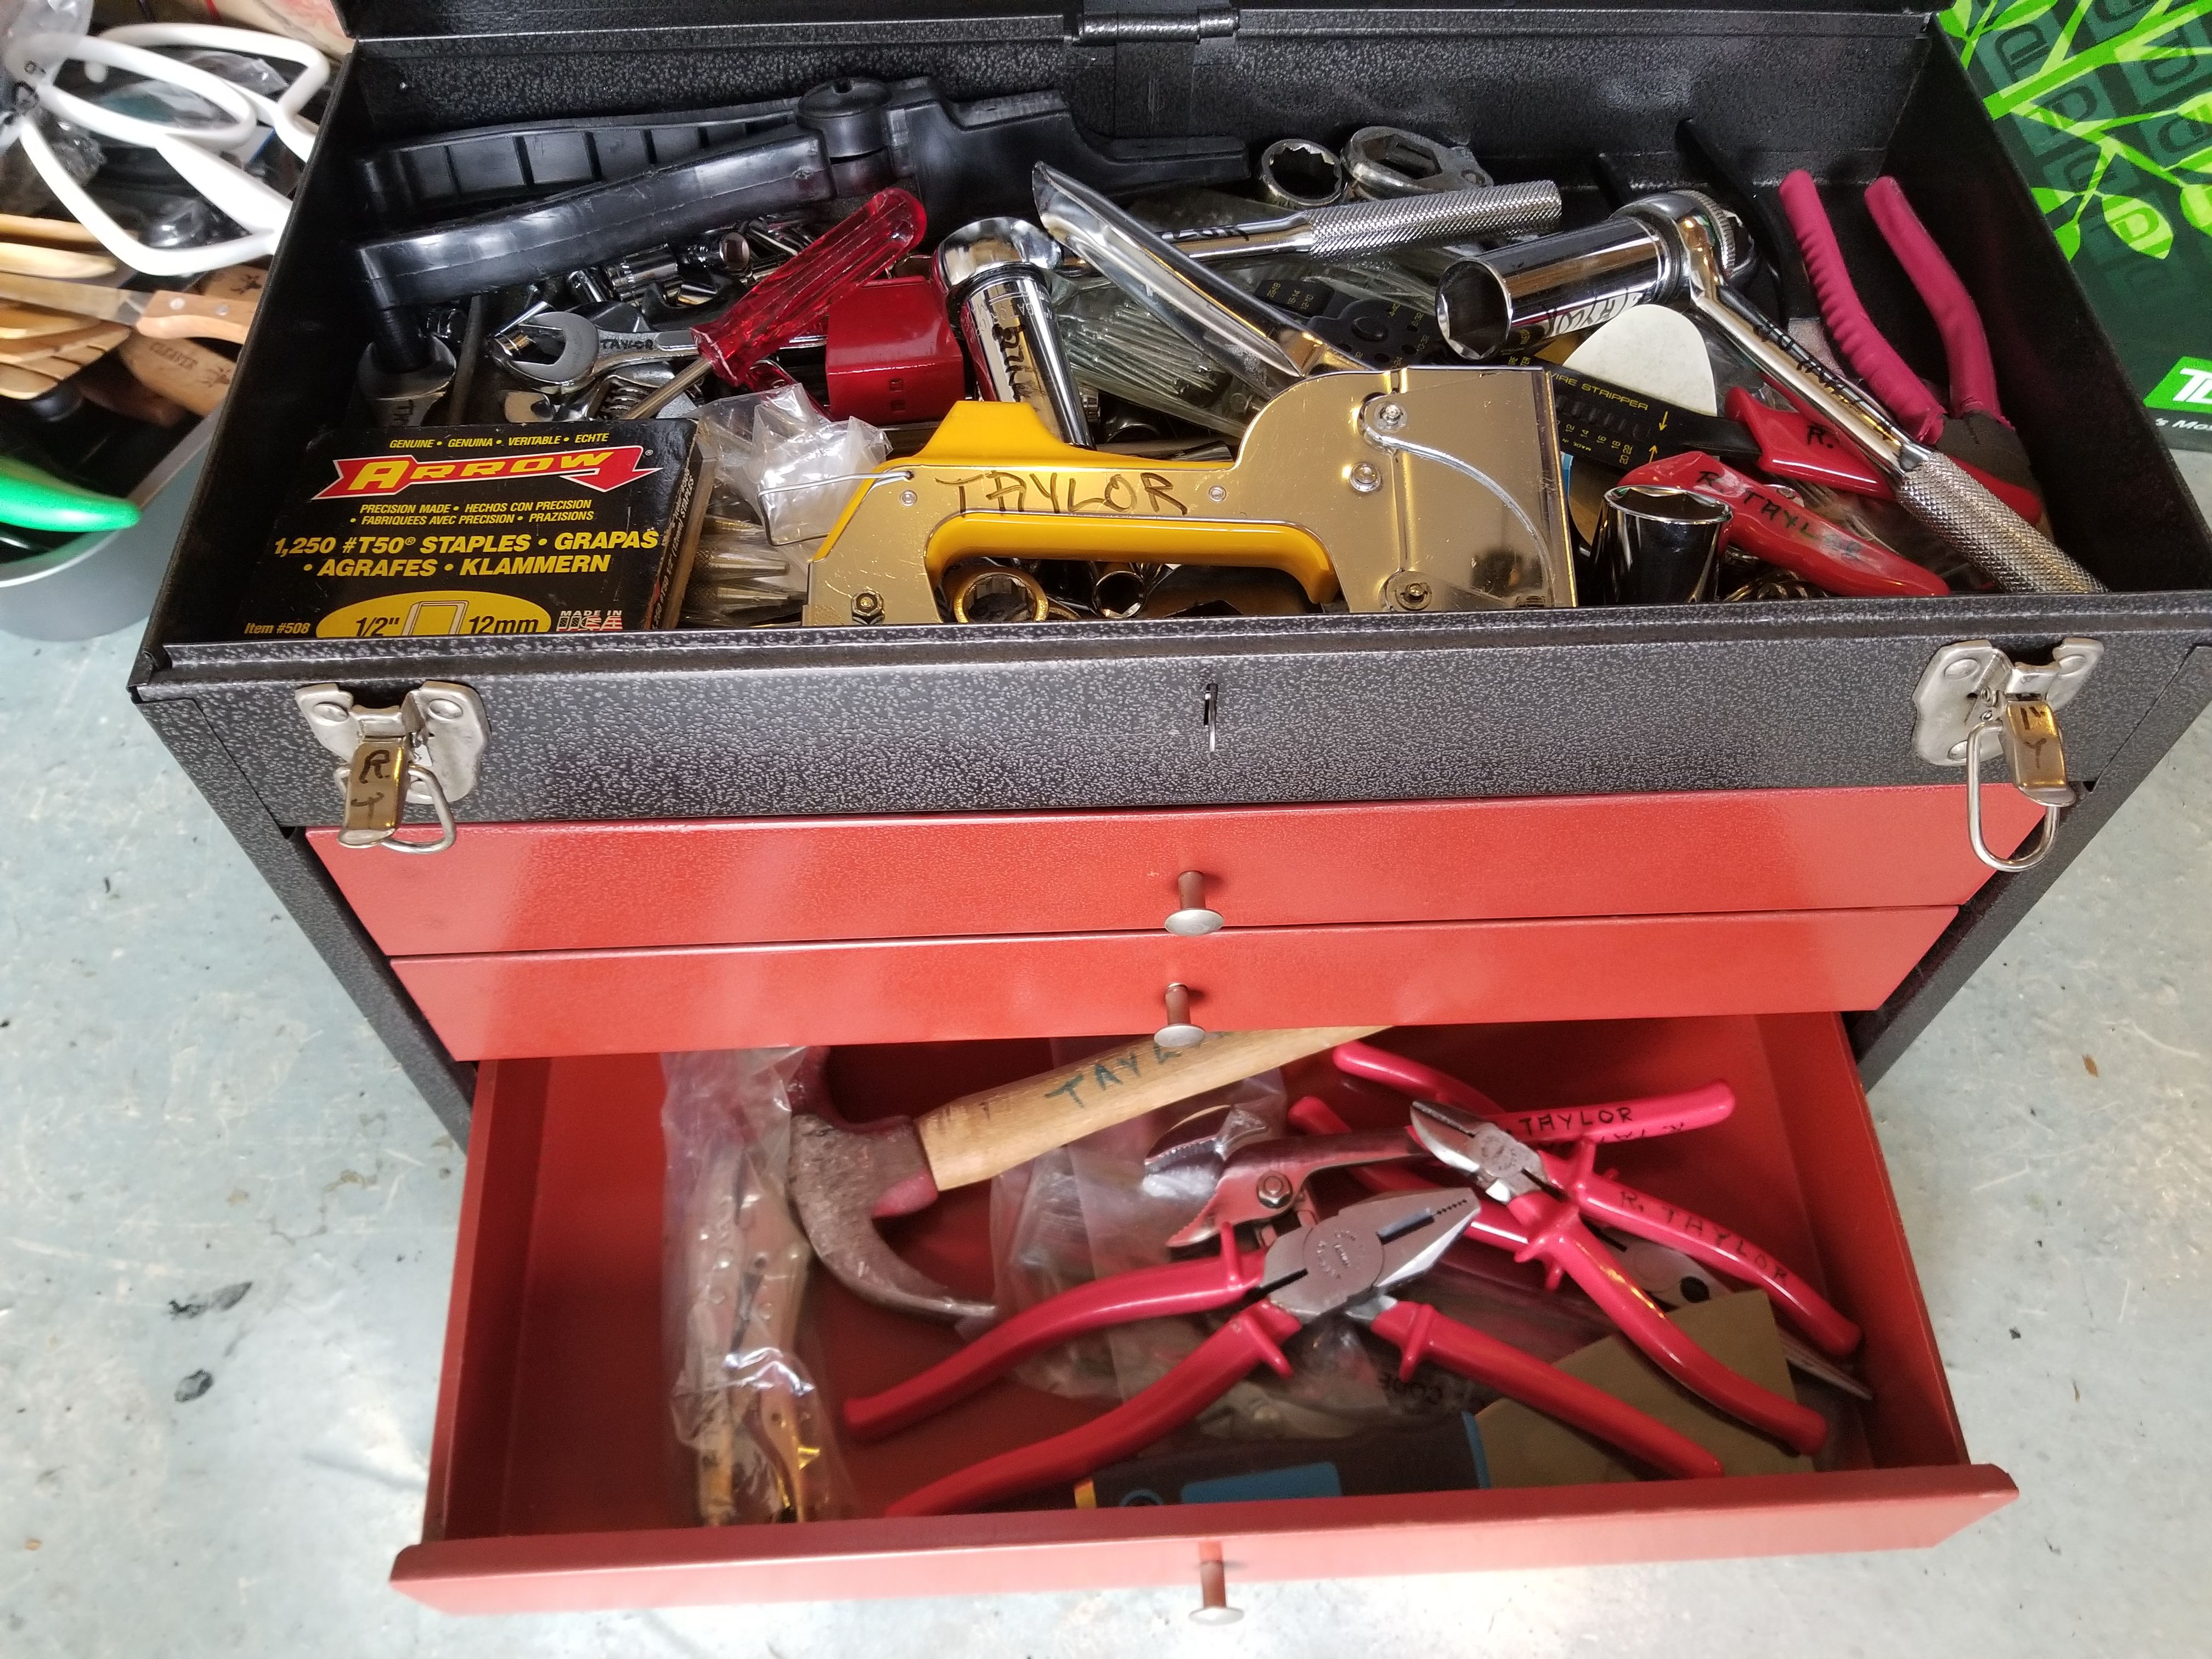 Tool box with tools: wrenches, pliers, screw drivers and much more